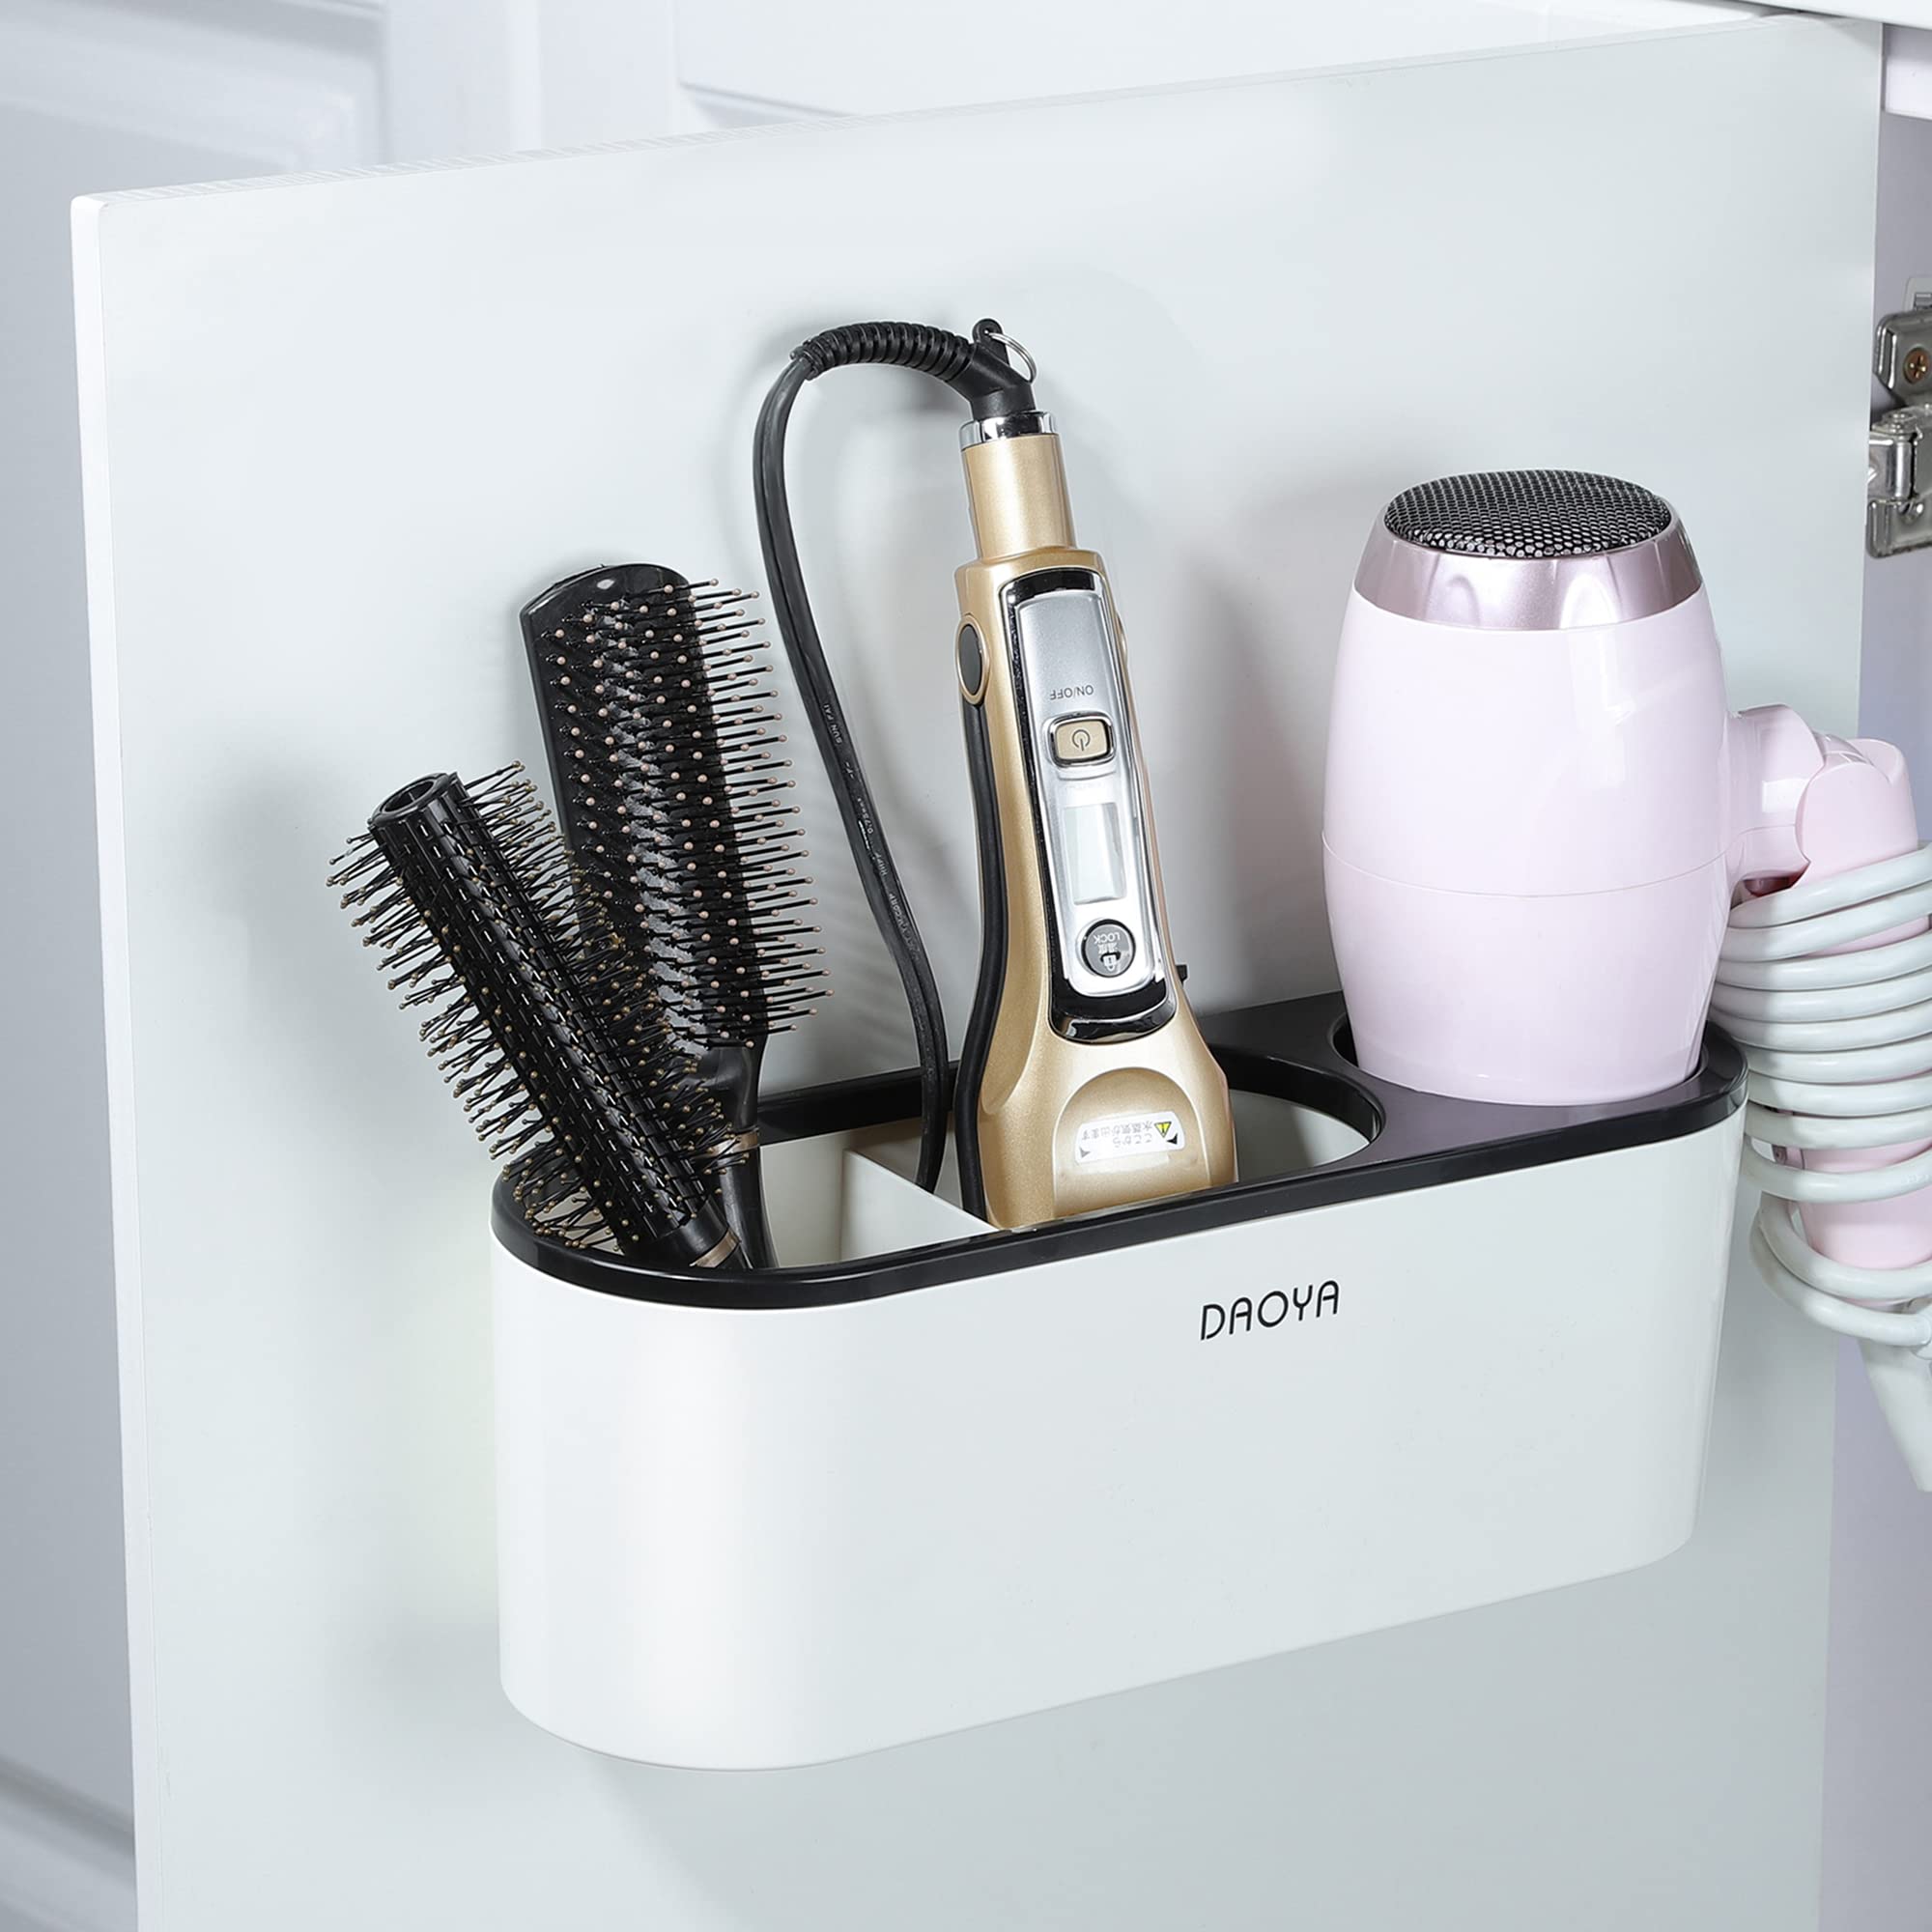 ULG Hair Tool Organizer, Hair Dryer Holder Over Cabinet or Wall Mount